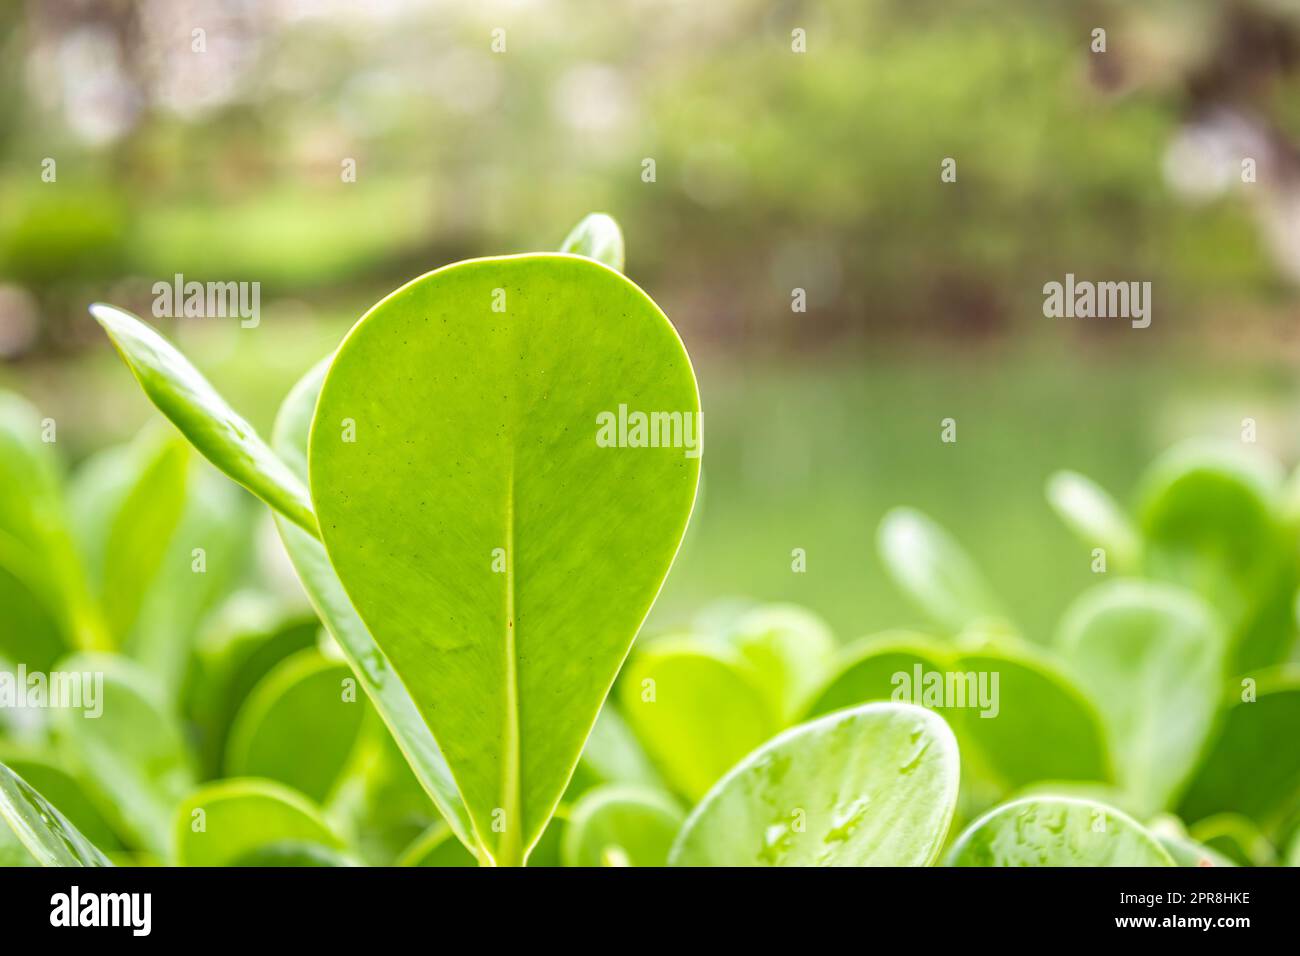 Clusia (Clusia rosea), tree with a very characteristic light green, oval-shaped, long leaf. Side view. Stock Photo